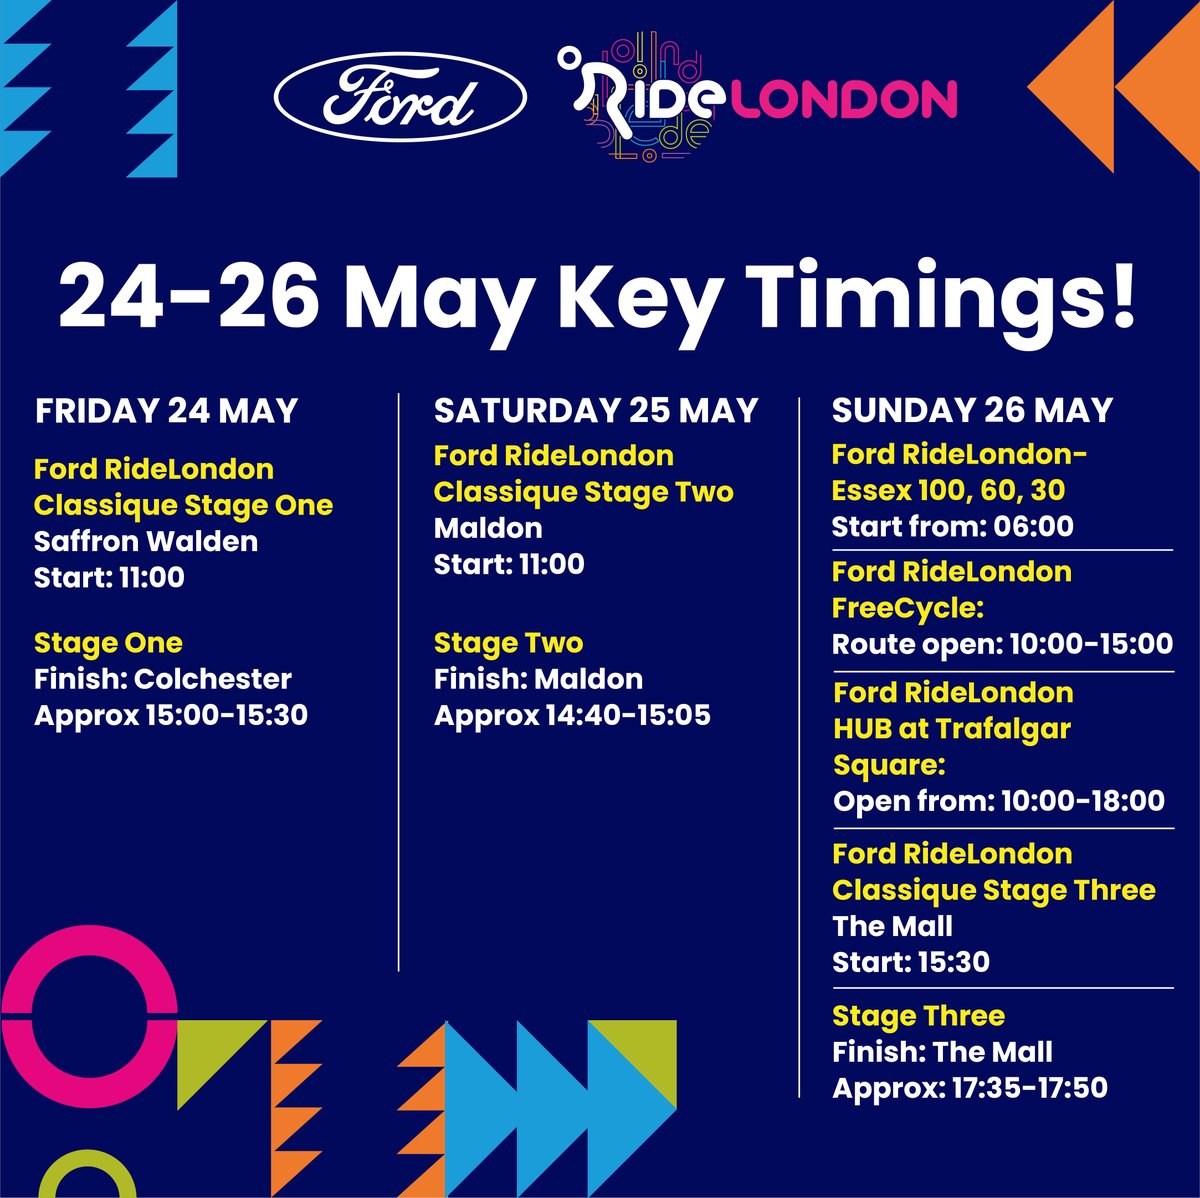 We are so ready for Ford RideLondon weekend! 😀 Whether you are a participant or a spectator, here are all the essential times you'll need to catch the action over the next few days 🚴‍ #RideLondon